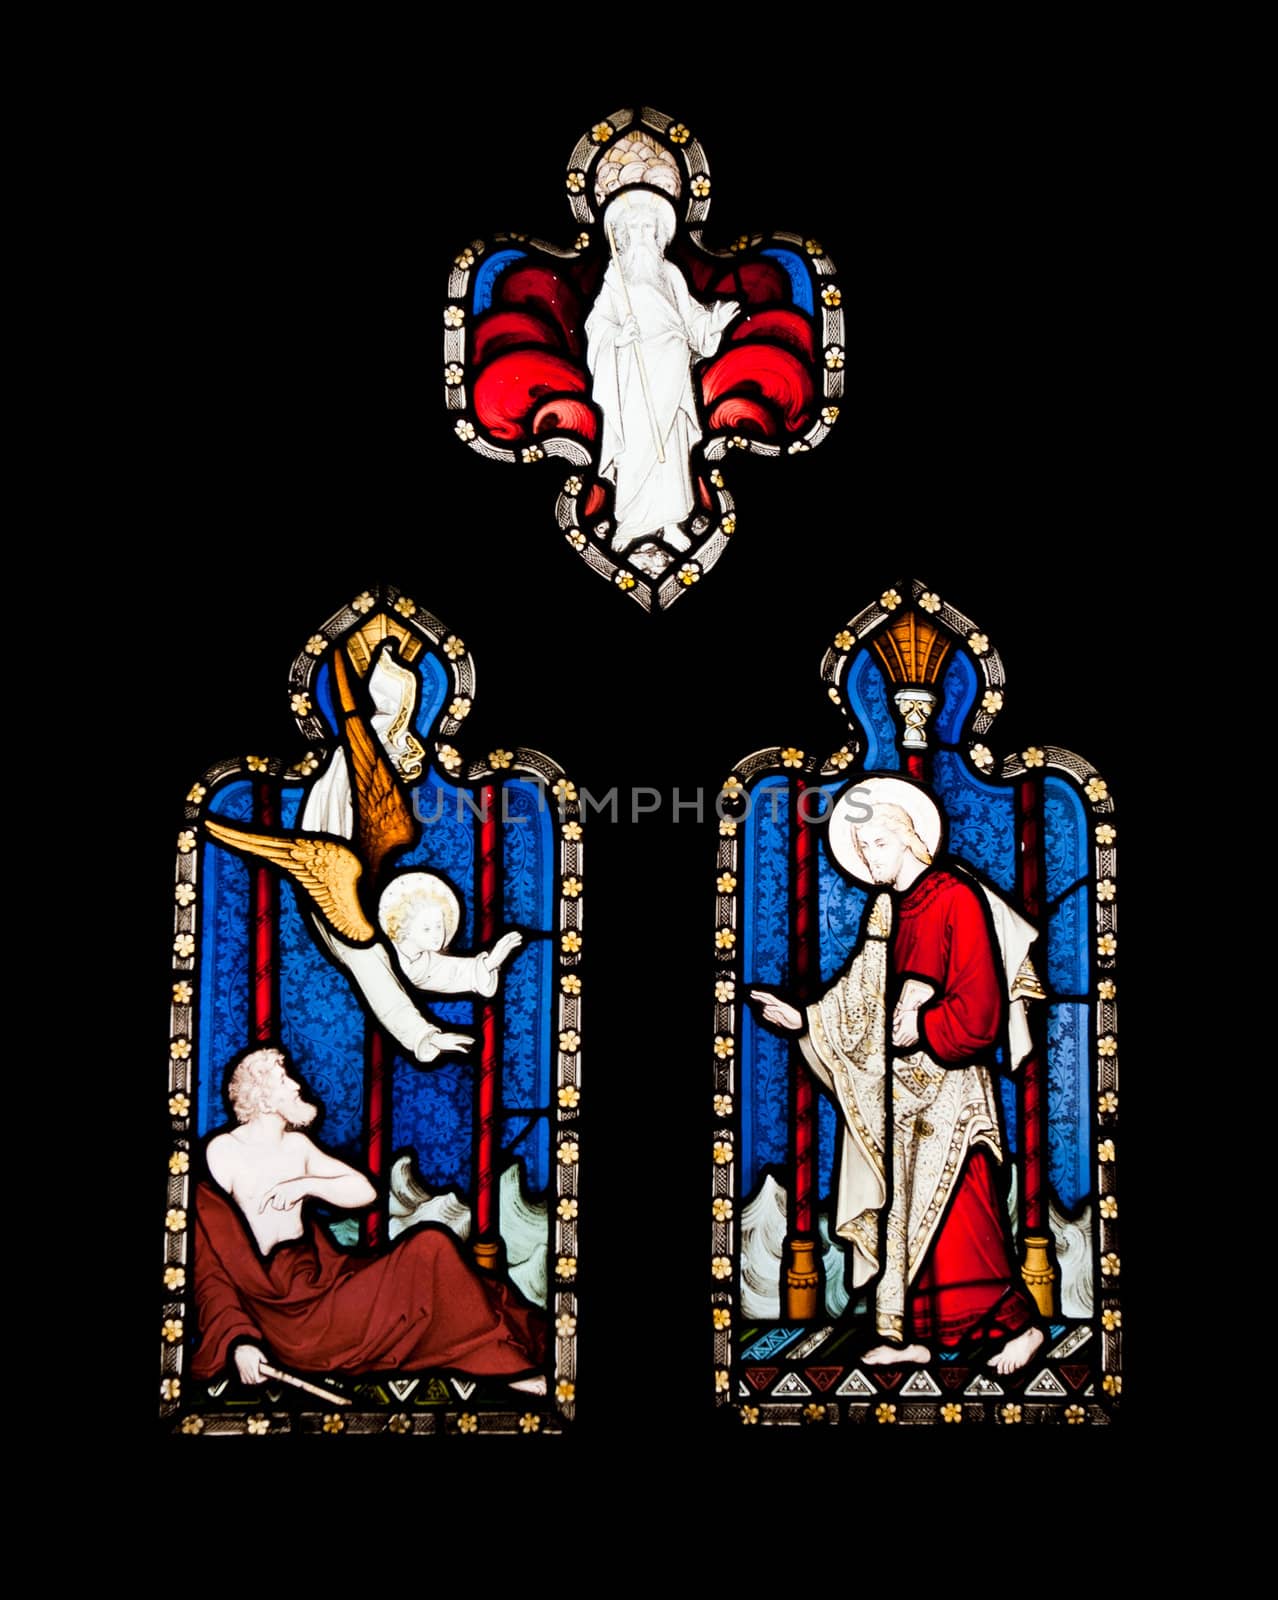 religious stained glass windows in Gloucester Cathedral, England (United Kingdom) (isolated on black background)